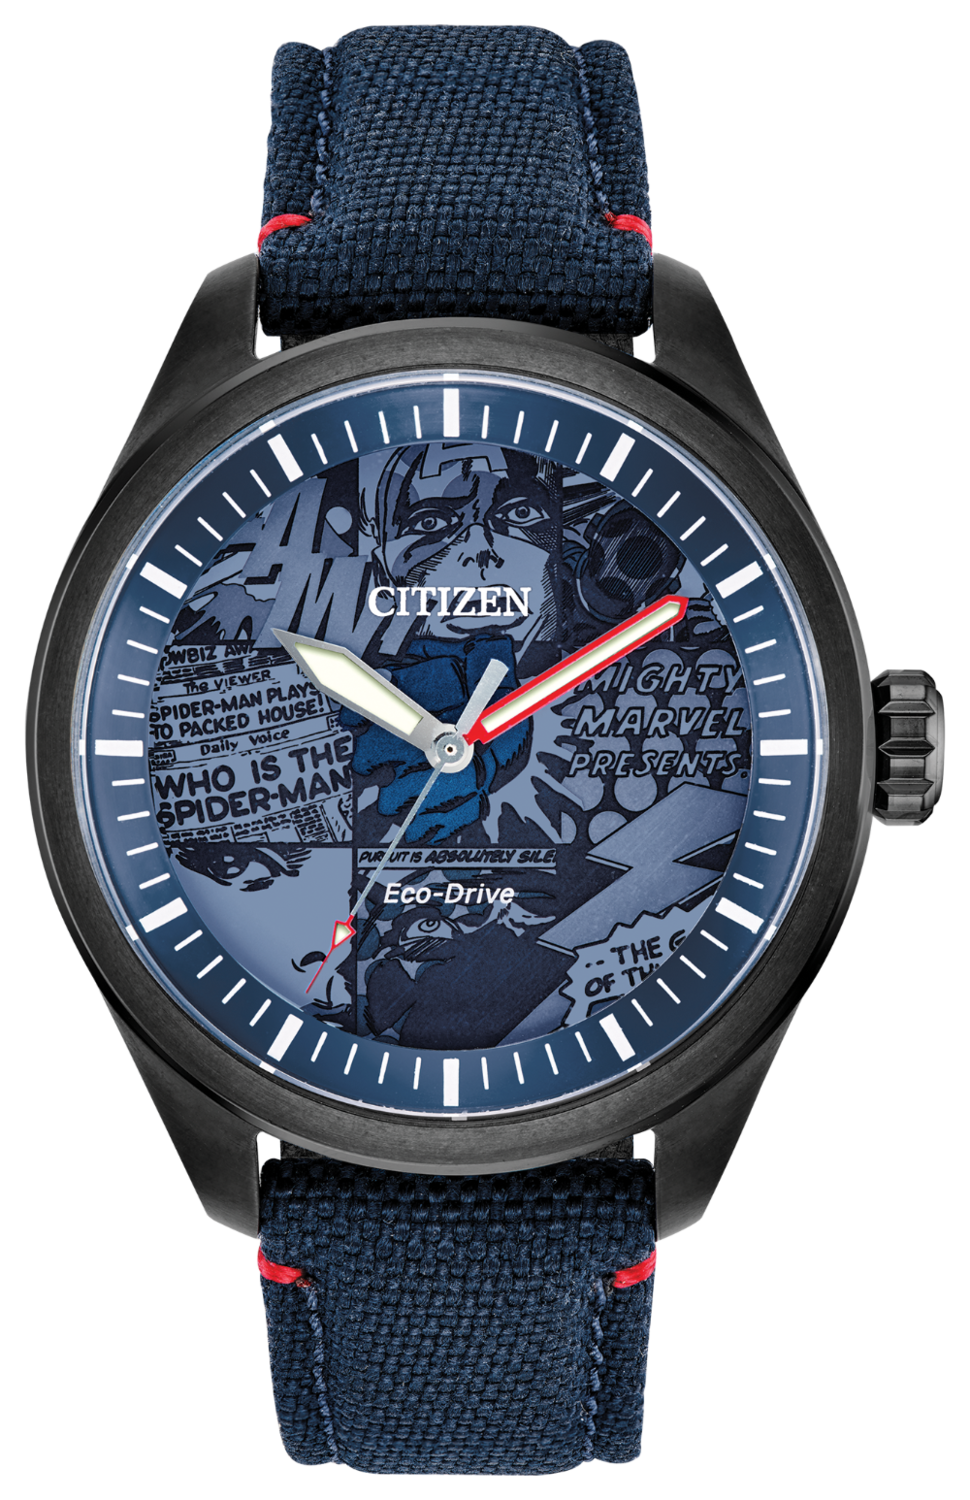 The Marvel Heroes timepiece by Citizen